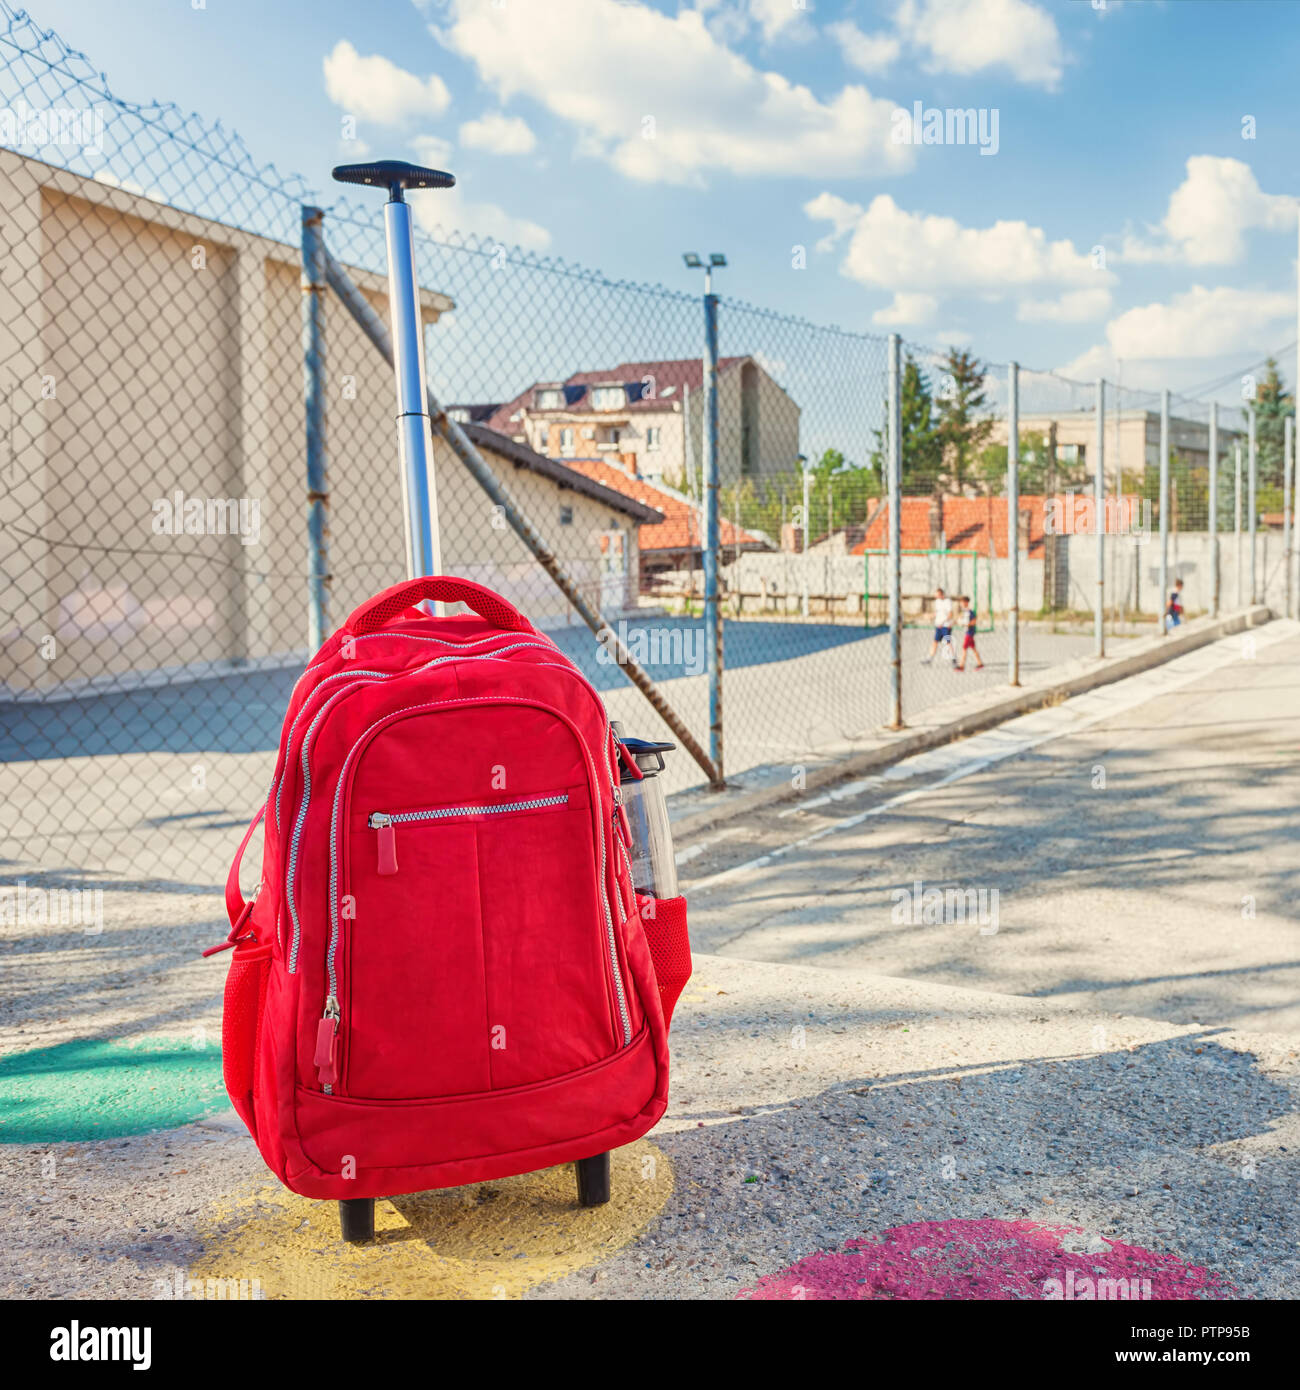 Modern red weightless school bag with handle and wheels on the schoolyard Stock Photo